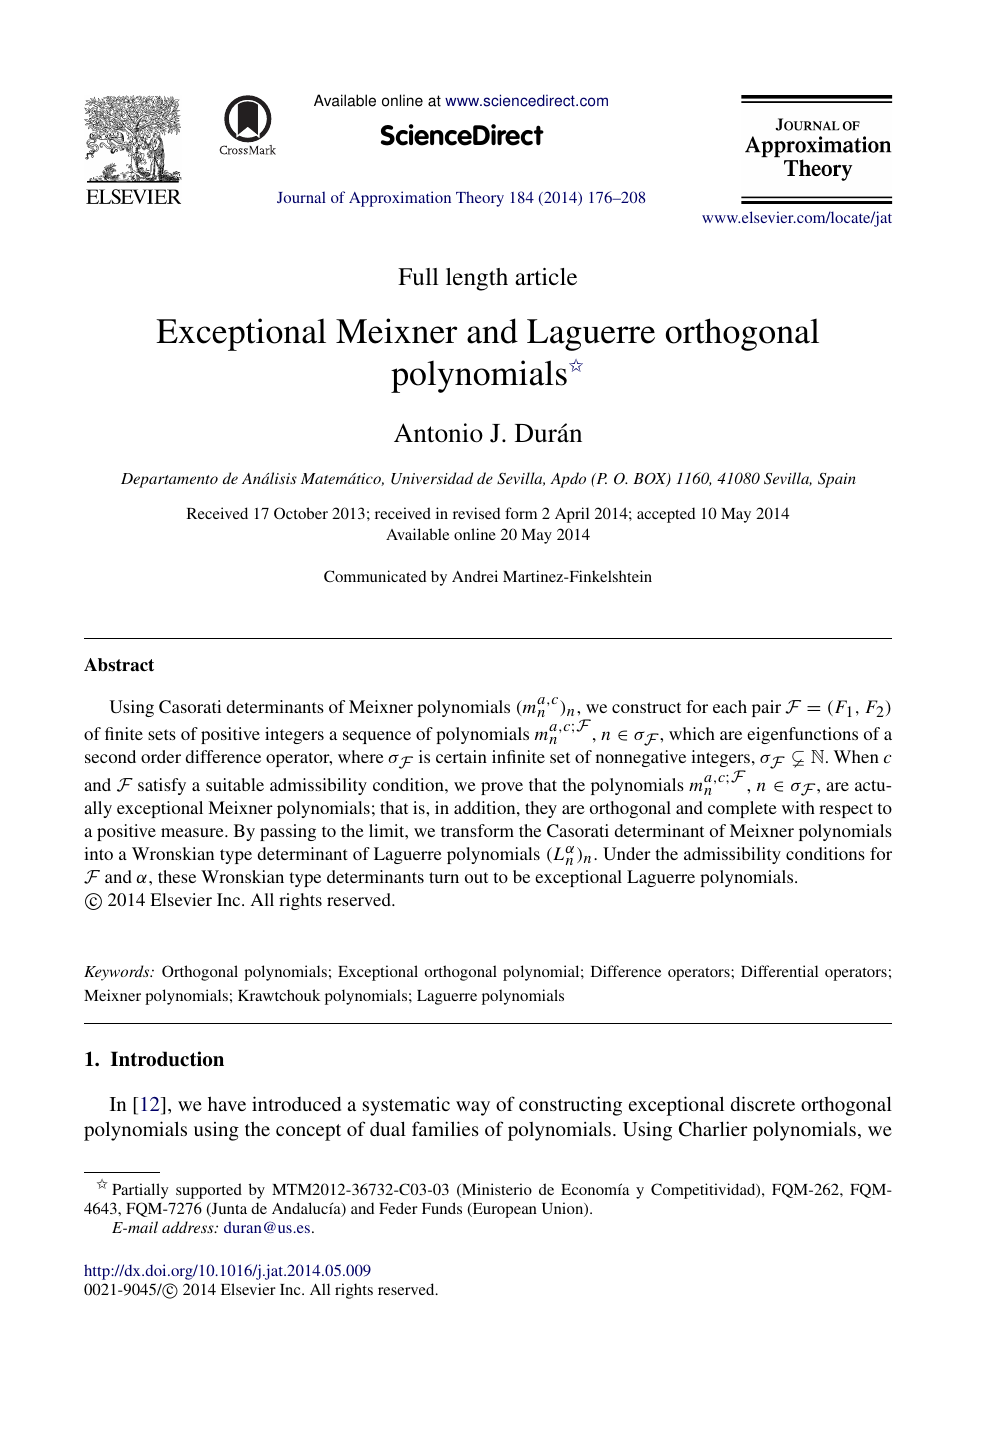 Exceptional Meixner And Laguerre Orthogonal Polynomials Topic Of Research Paper In Mathematics Download Scholarly Article Pdf And Read For Free On Cyberleninka Open Science Hub